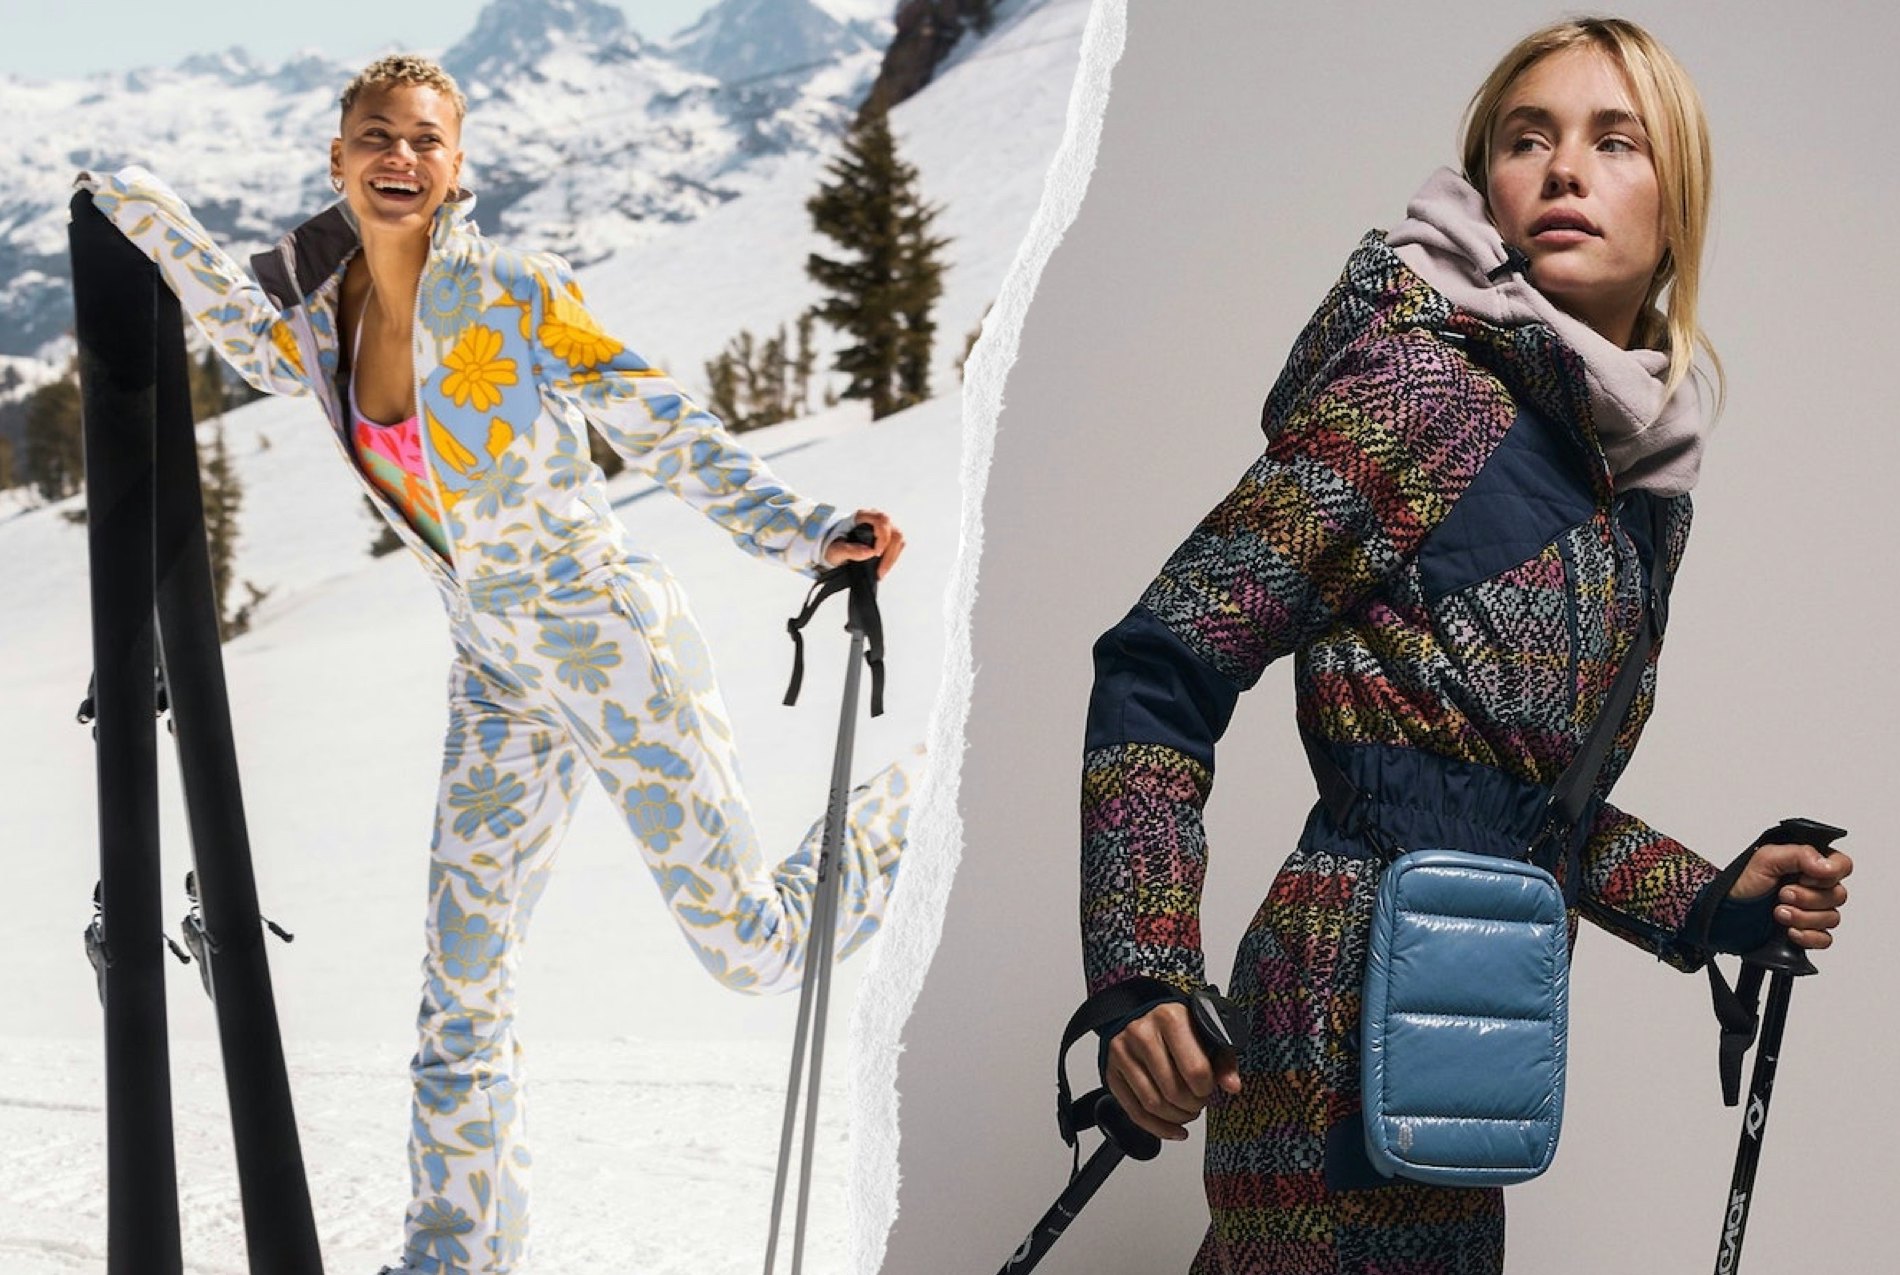 Say Hello to the Fashionable Ski Pieces That'll Keep You Chic On